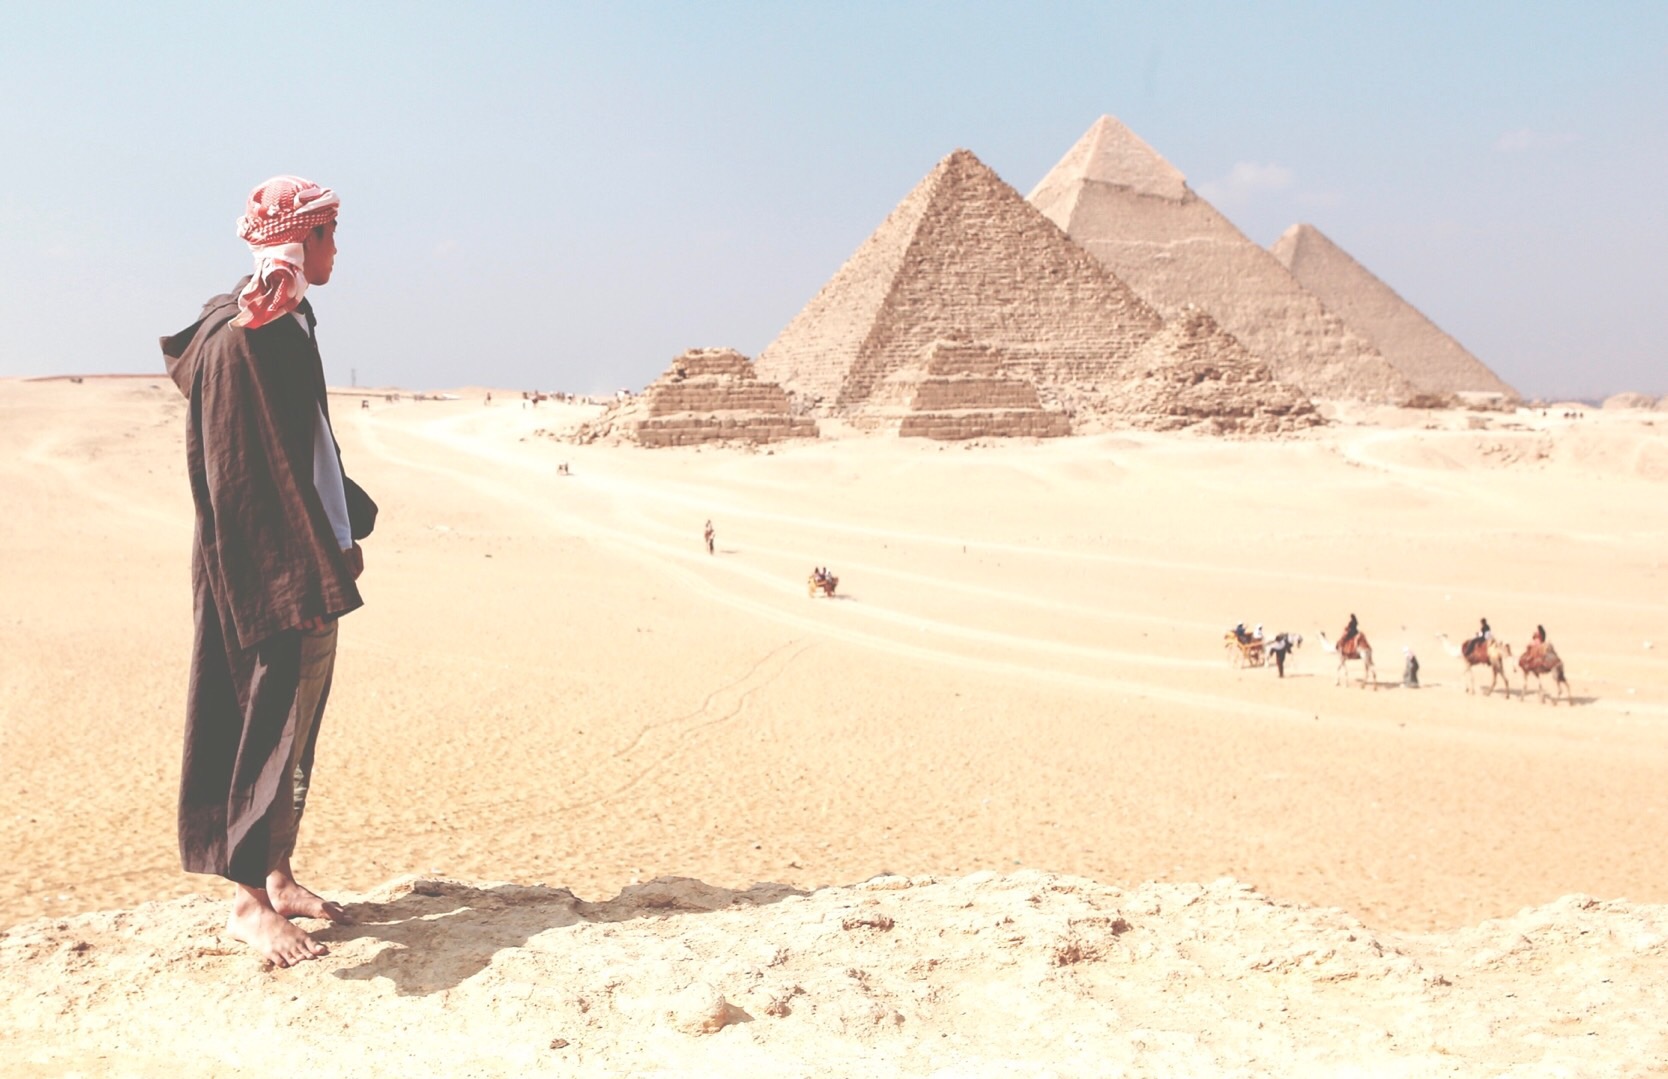 Egypt, Giza, Pyramids and mysterious